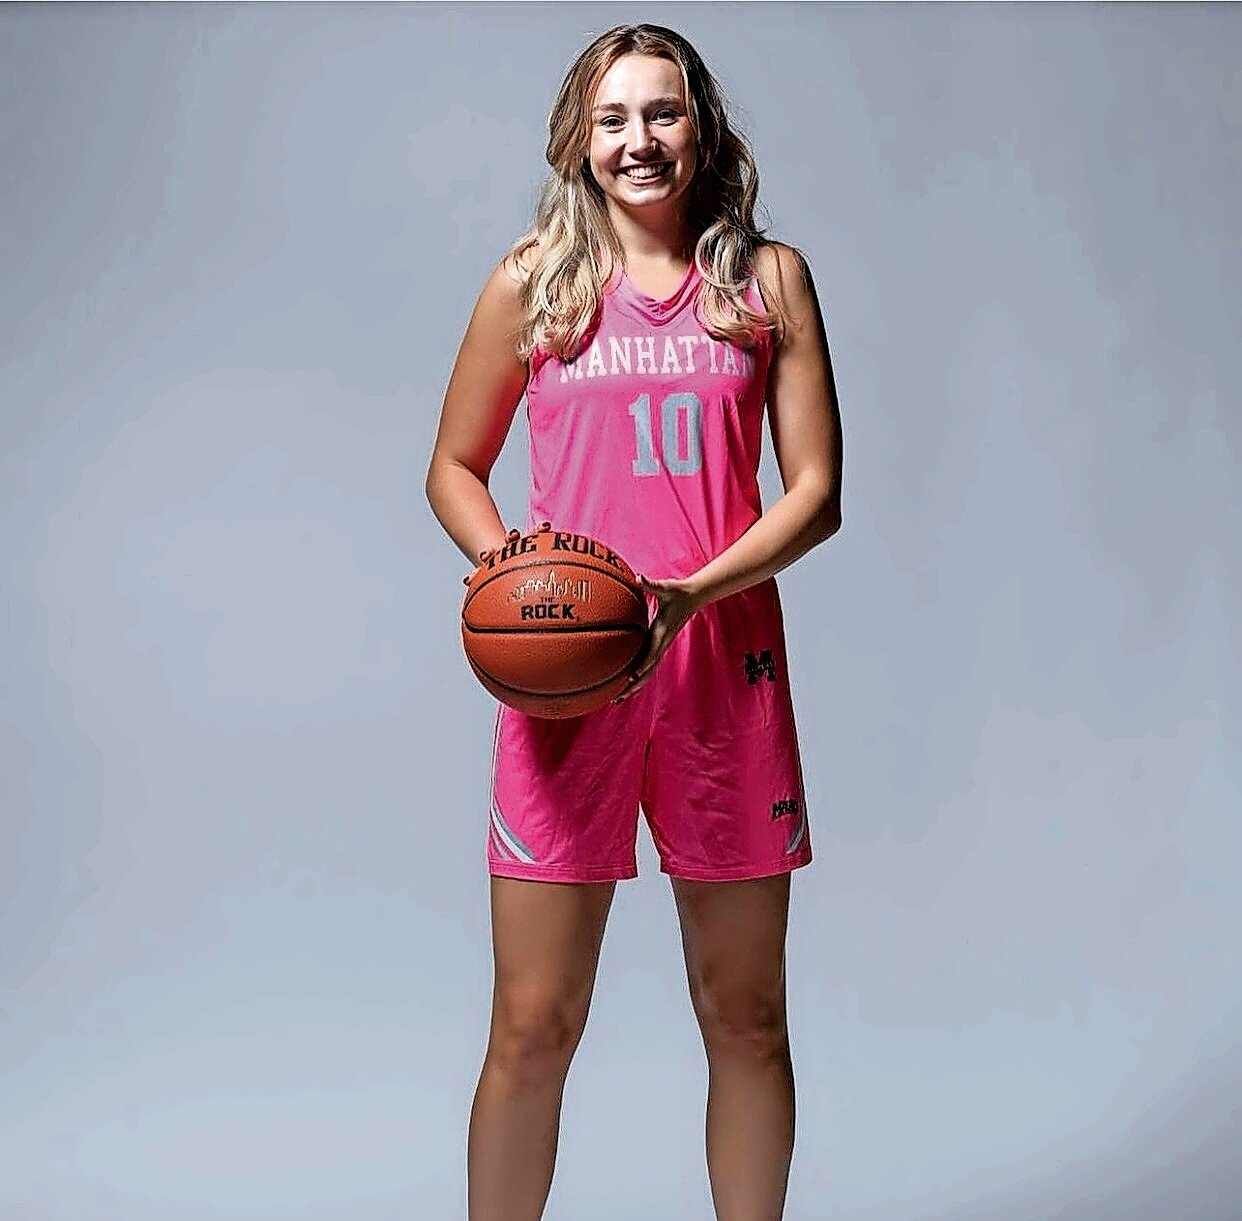 Manhattan sophomore Alyssa Costigan is carrying on a legacy started by her mother, Bridget Robeson Costigan, who was an thousand-point scorer at Manhattan in the late 80s. Costigan played high school basketball at St. Paul VI Catholic High School in Chantilly, Virginia before following in Bridget’s footsteps by committing to play for the Jaspers.